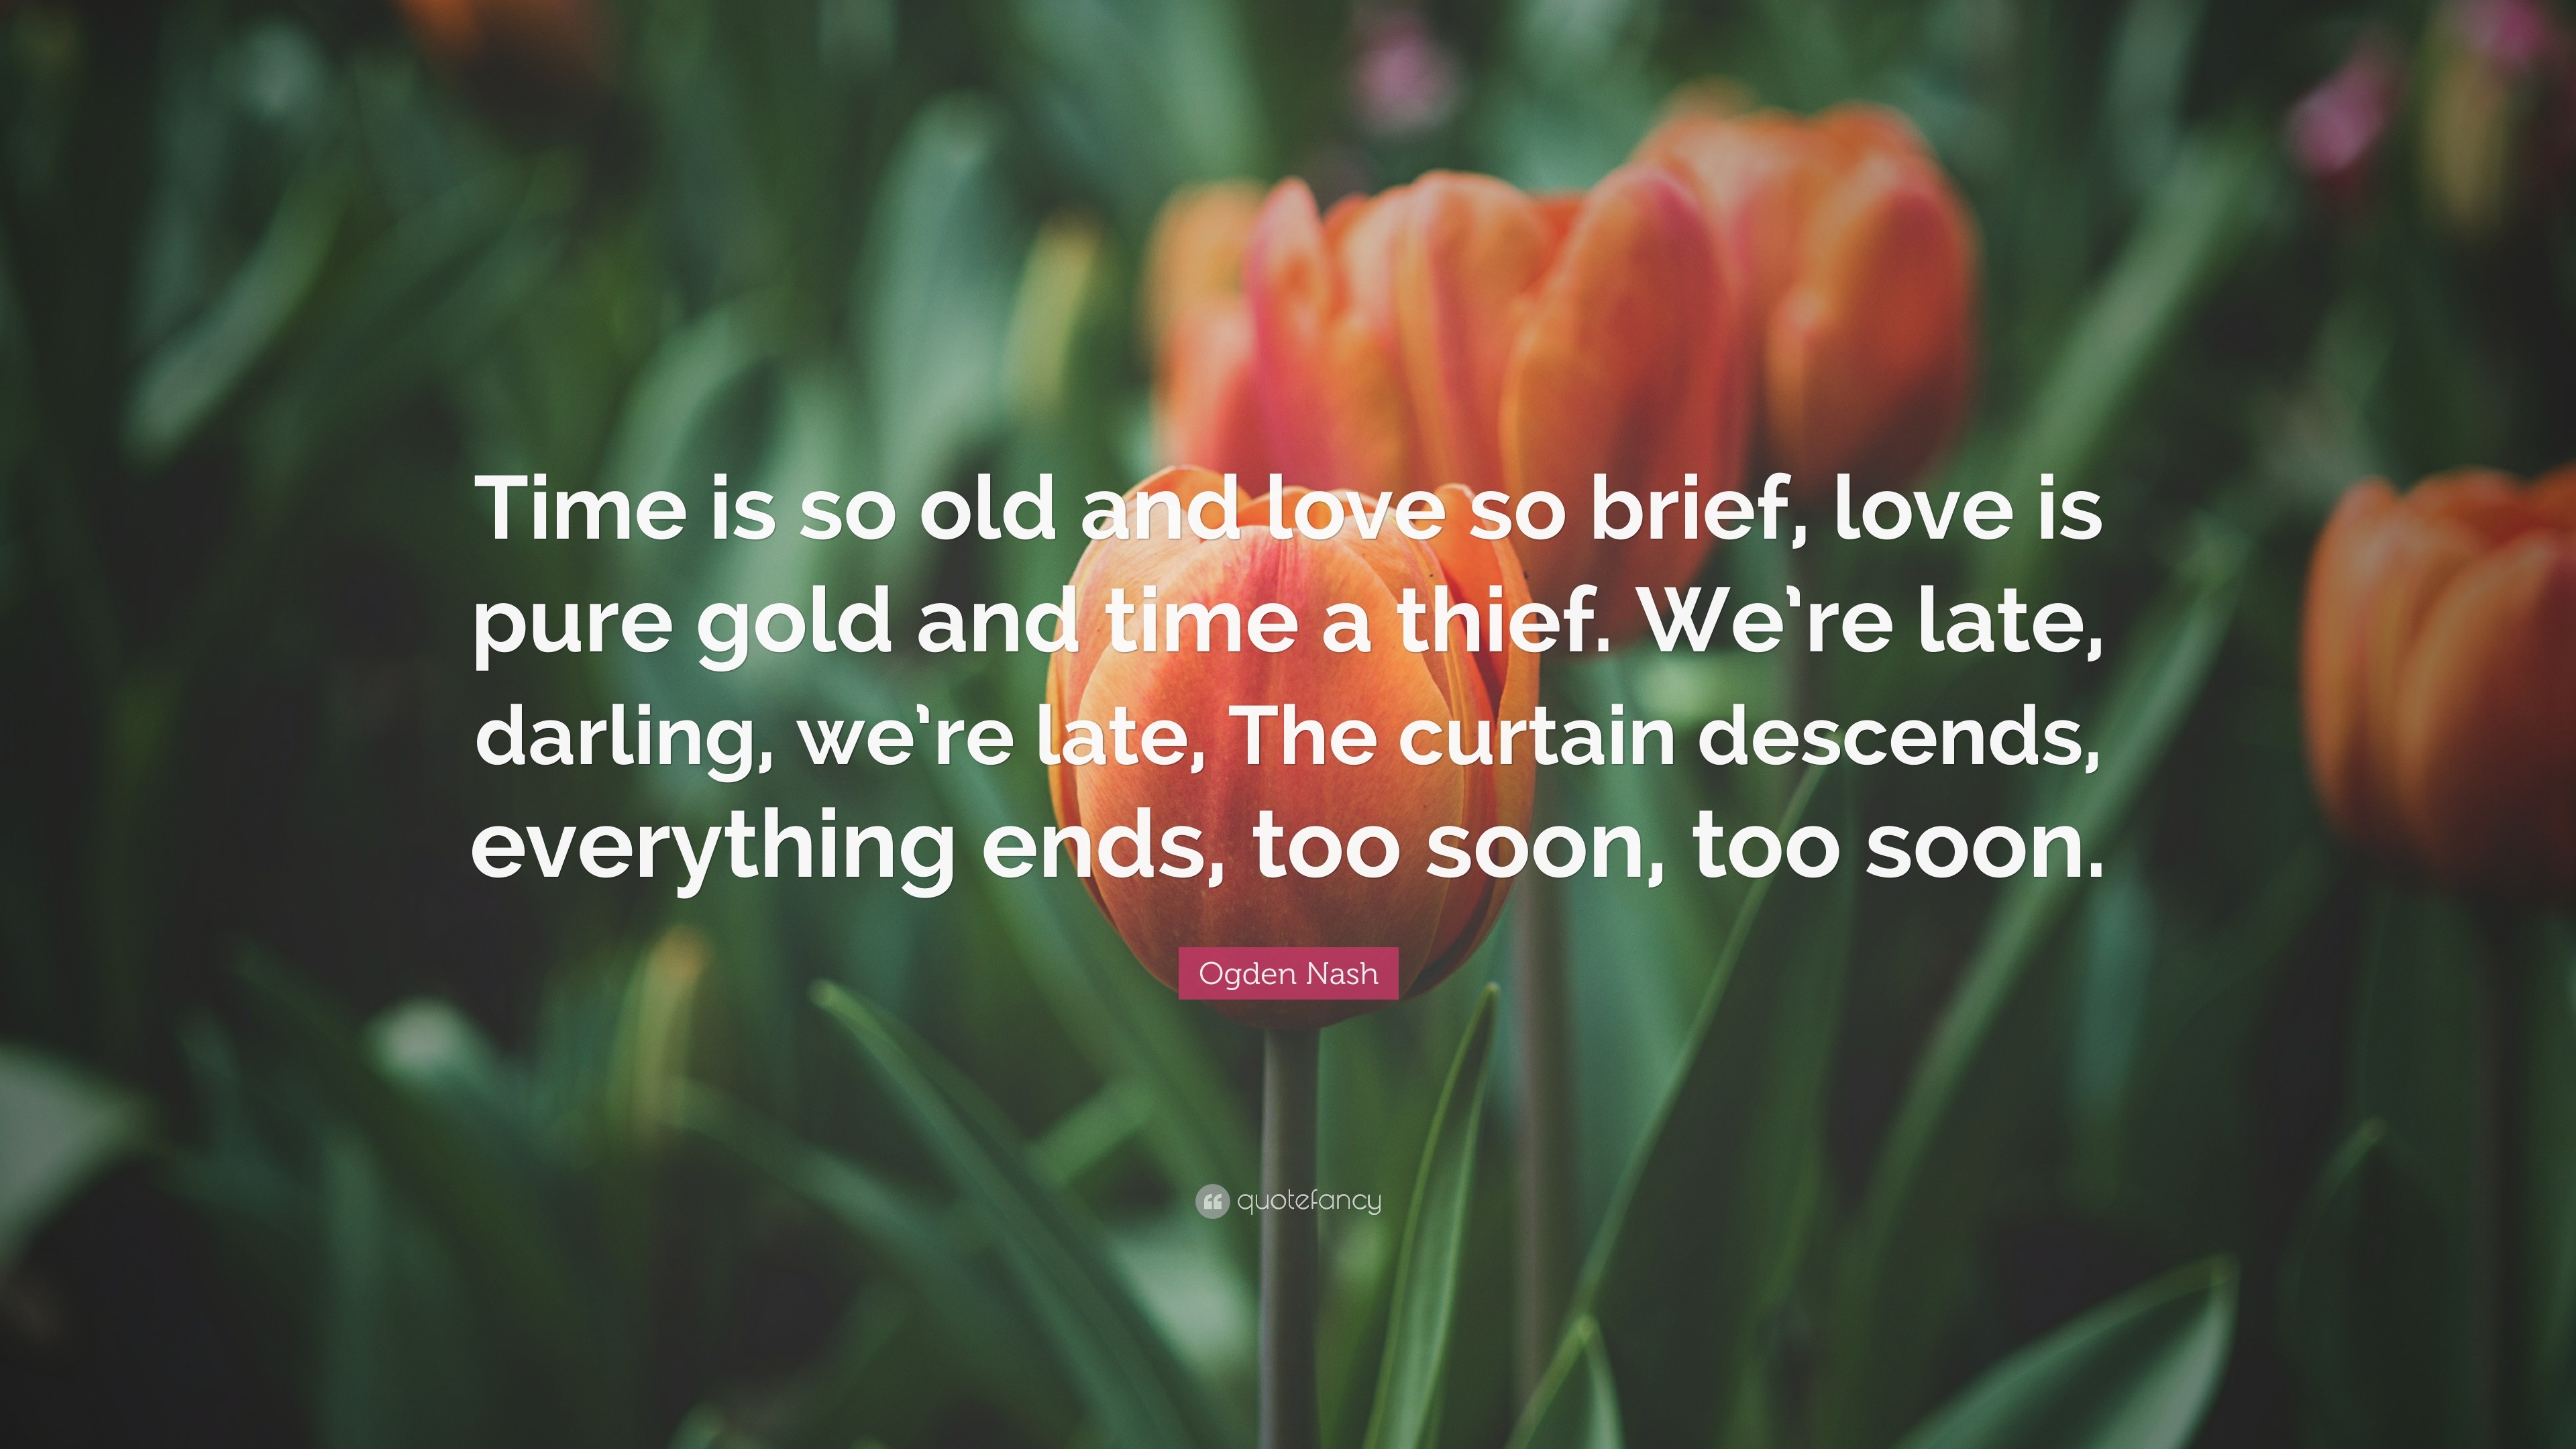 Ogden Nash Quote: “Time is so old and love so brief, love is pure gold and  time a thief. We're late, darling, we're late, The curtain desce”